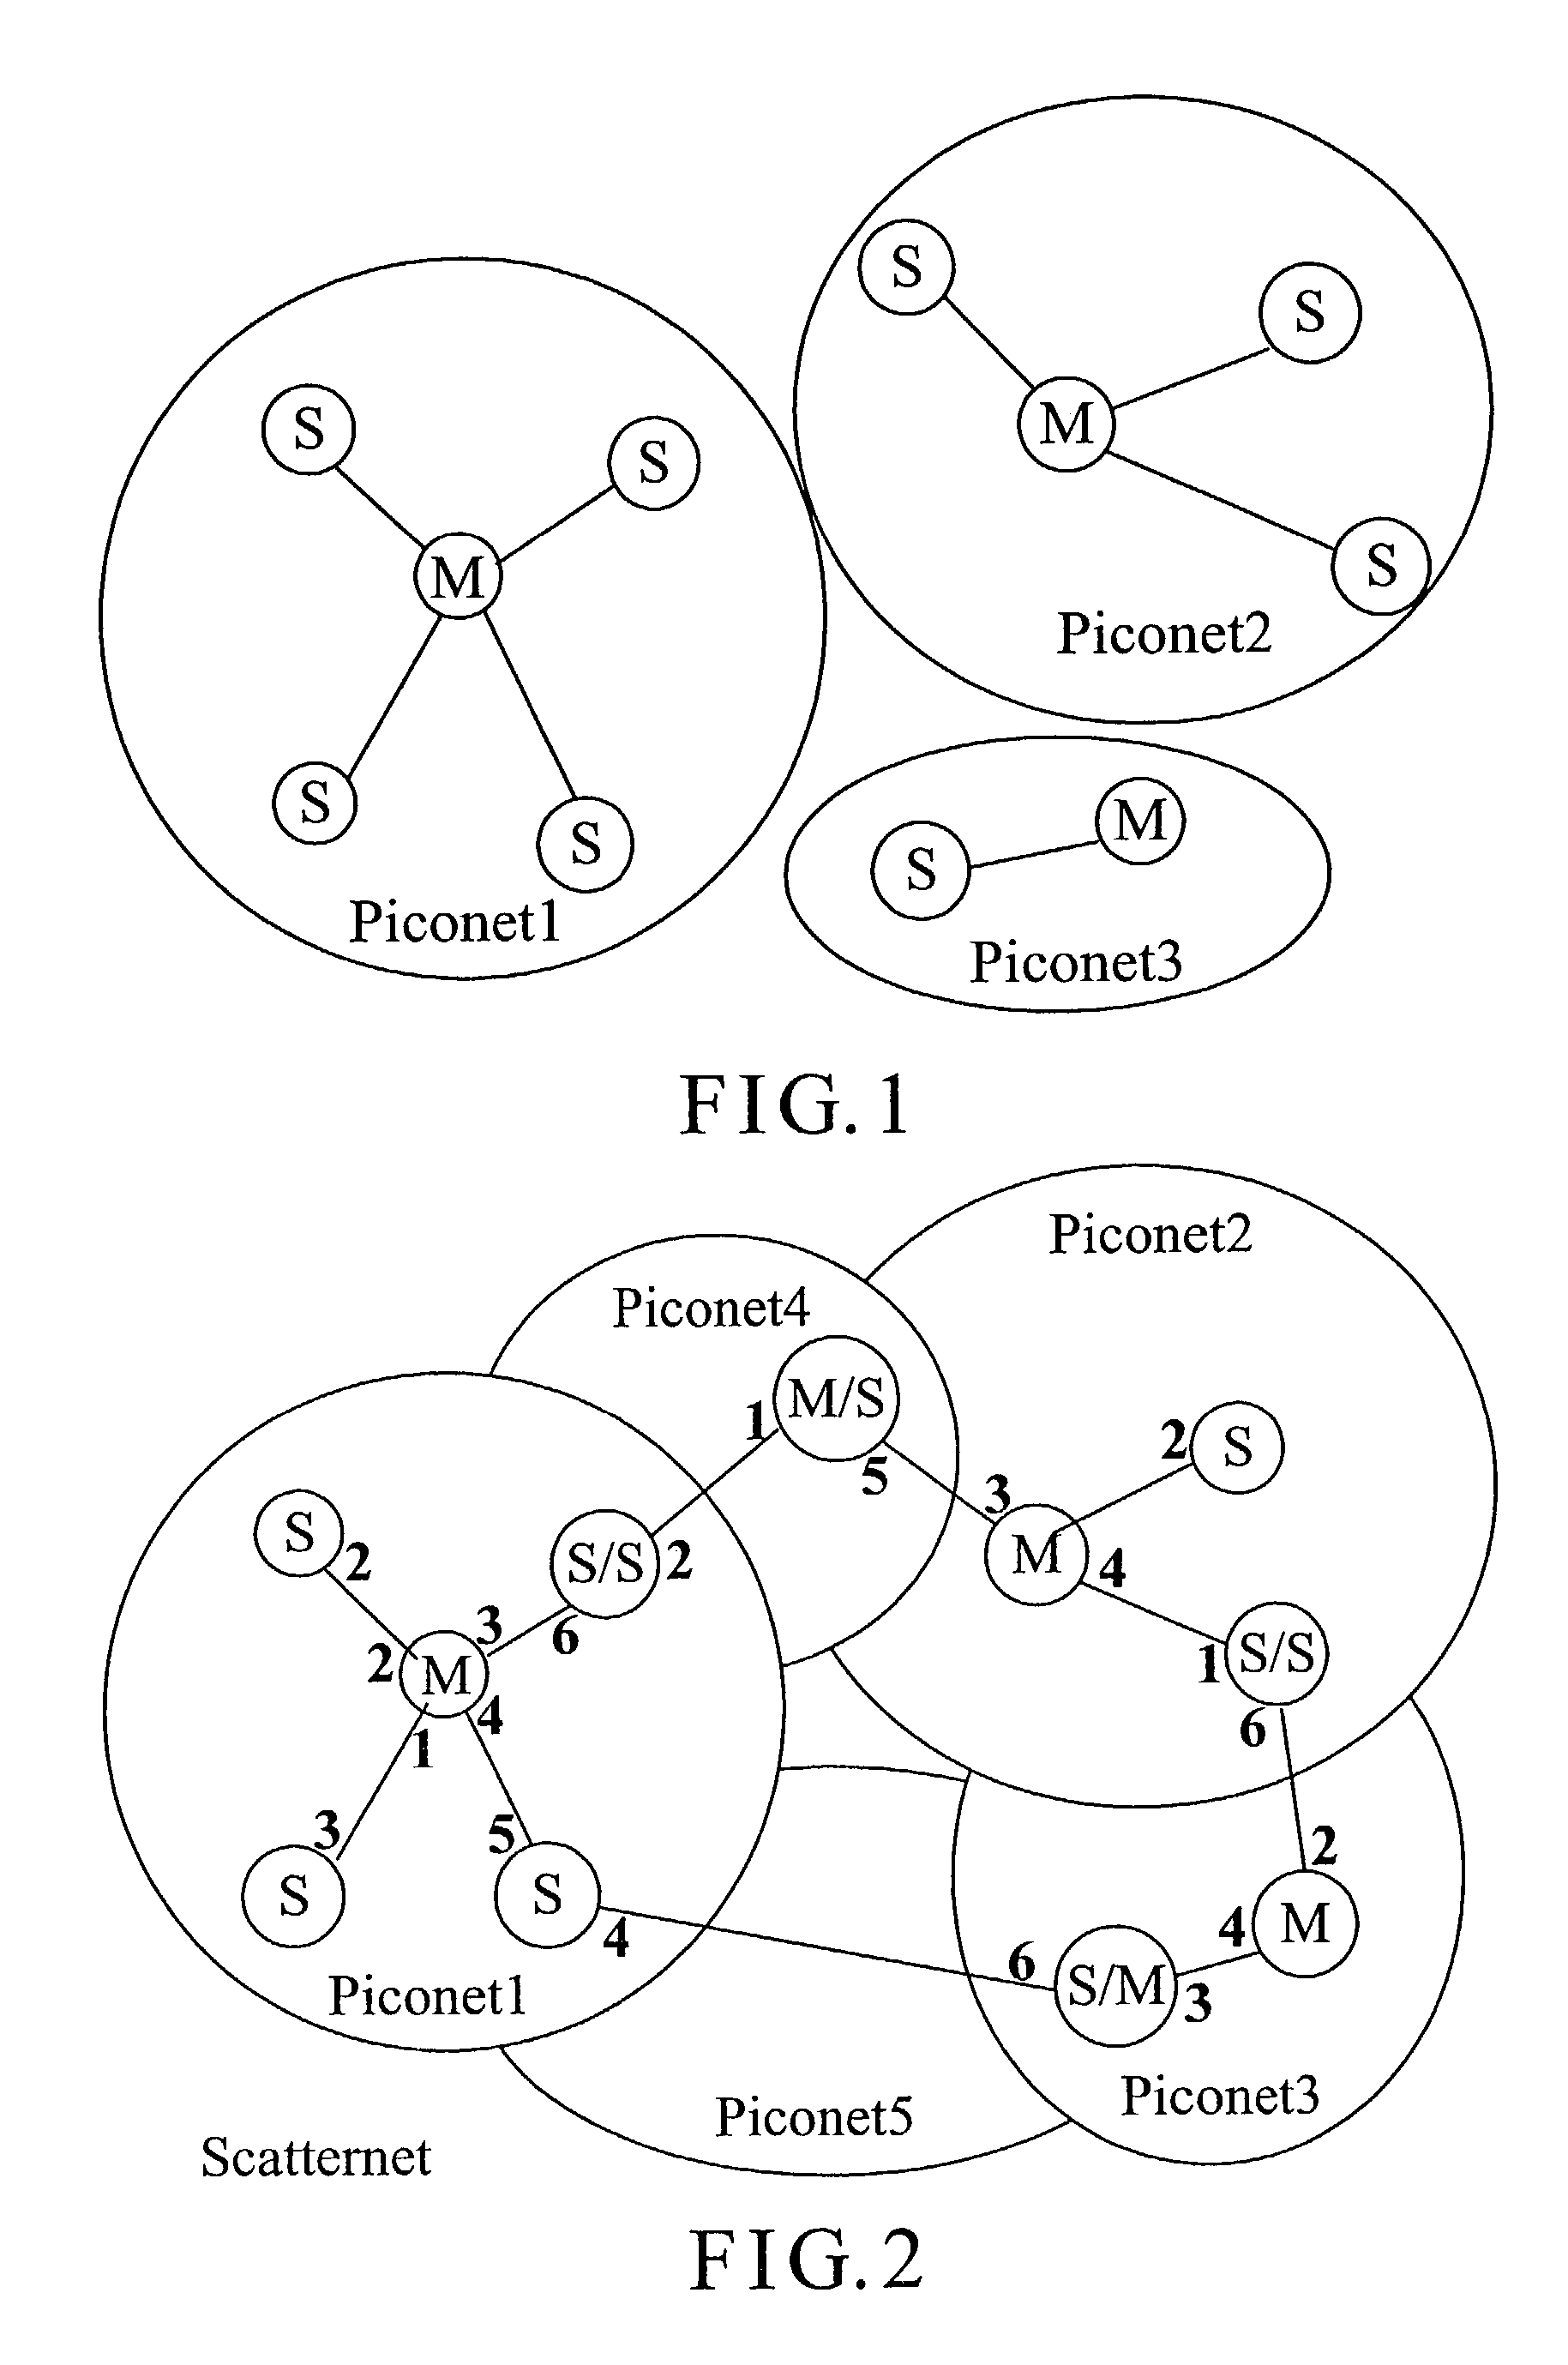 Data transfer method for a bluetooth scatternet